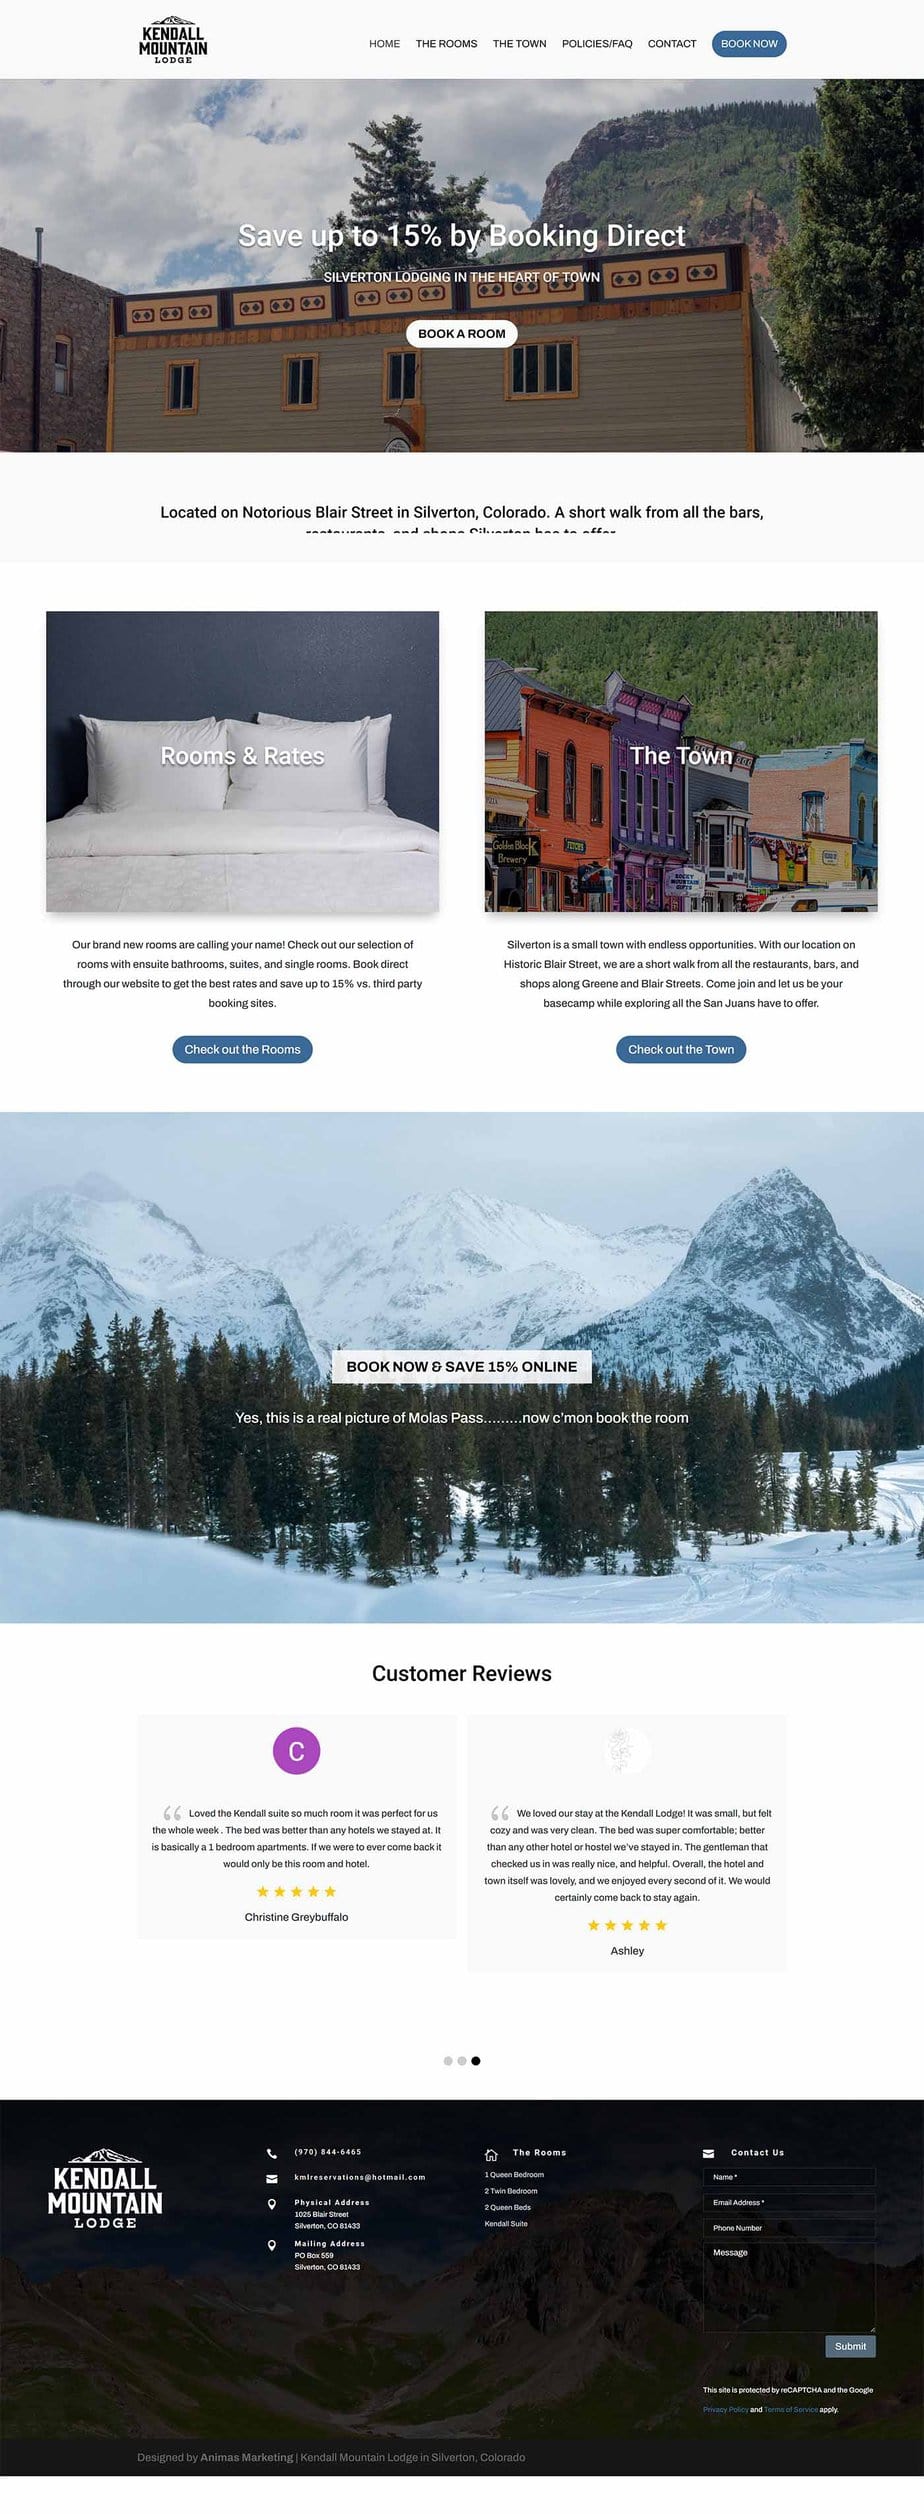 kendall mountain web design project